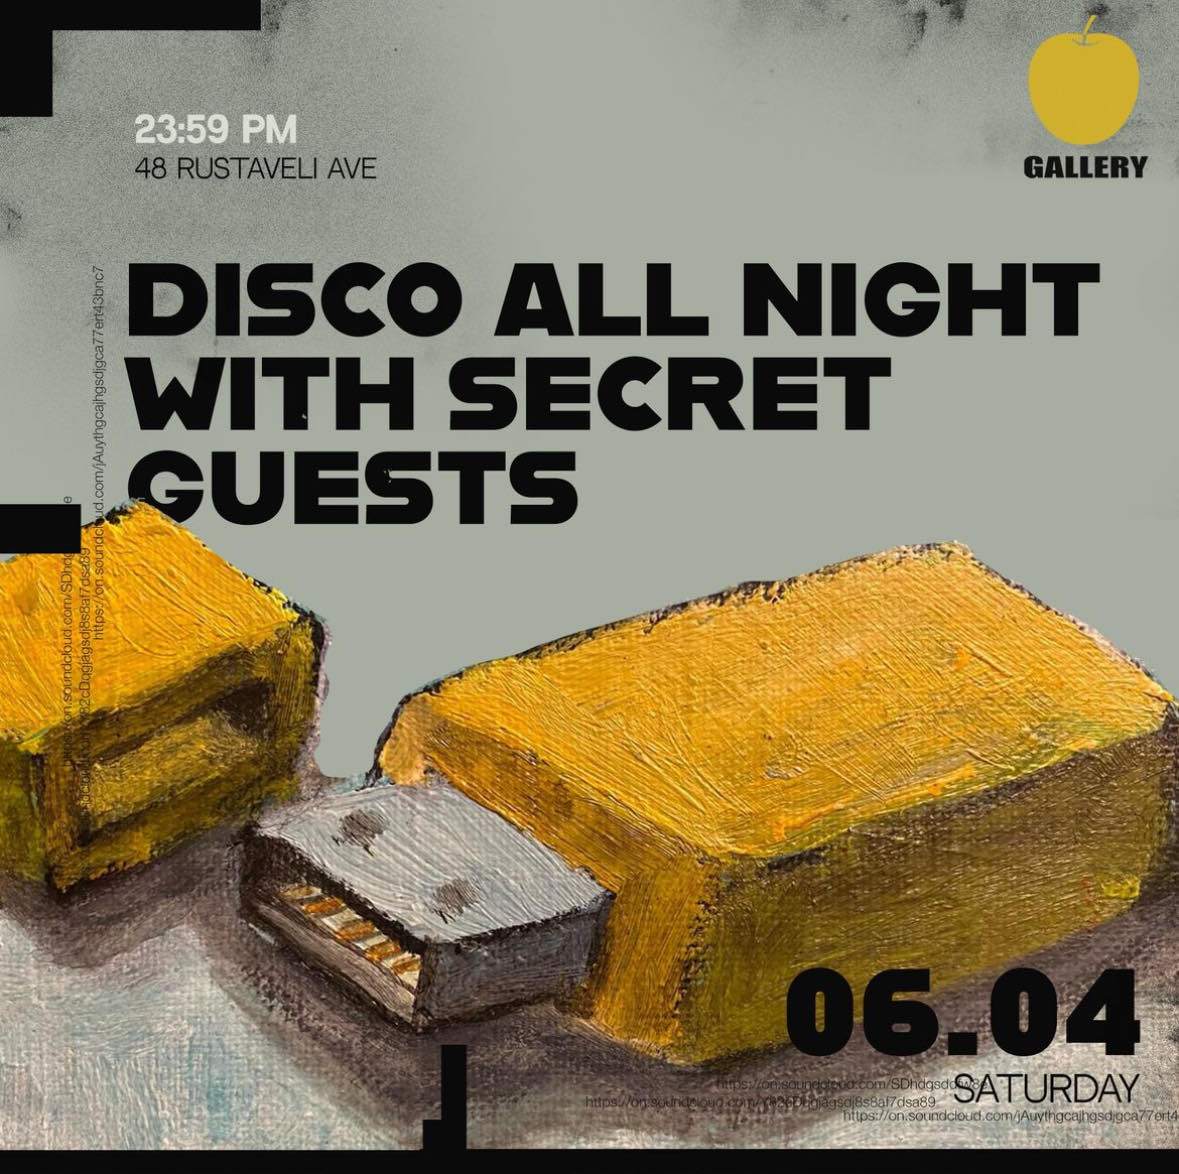 Disco all night with secret guests - Página frontal